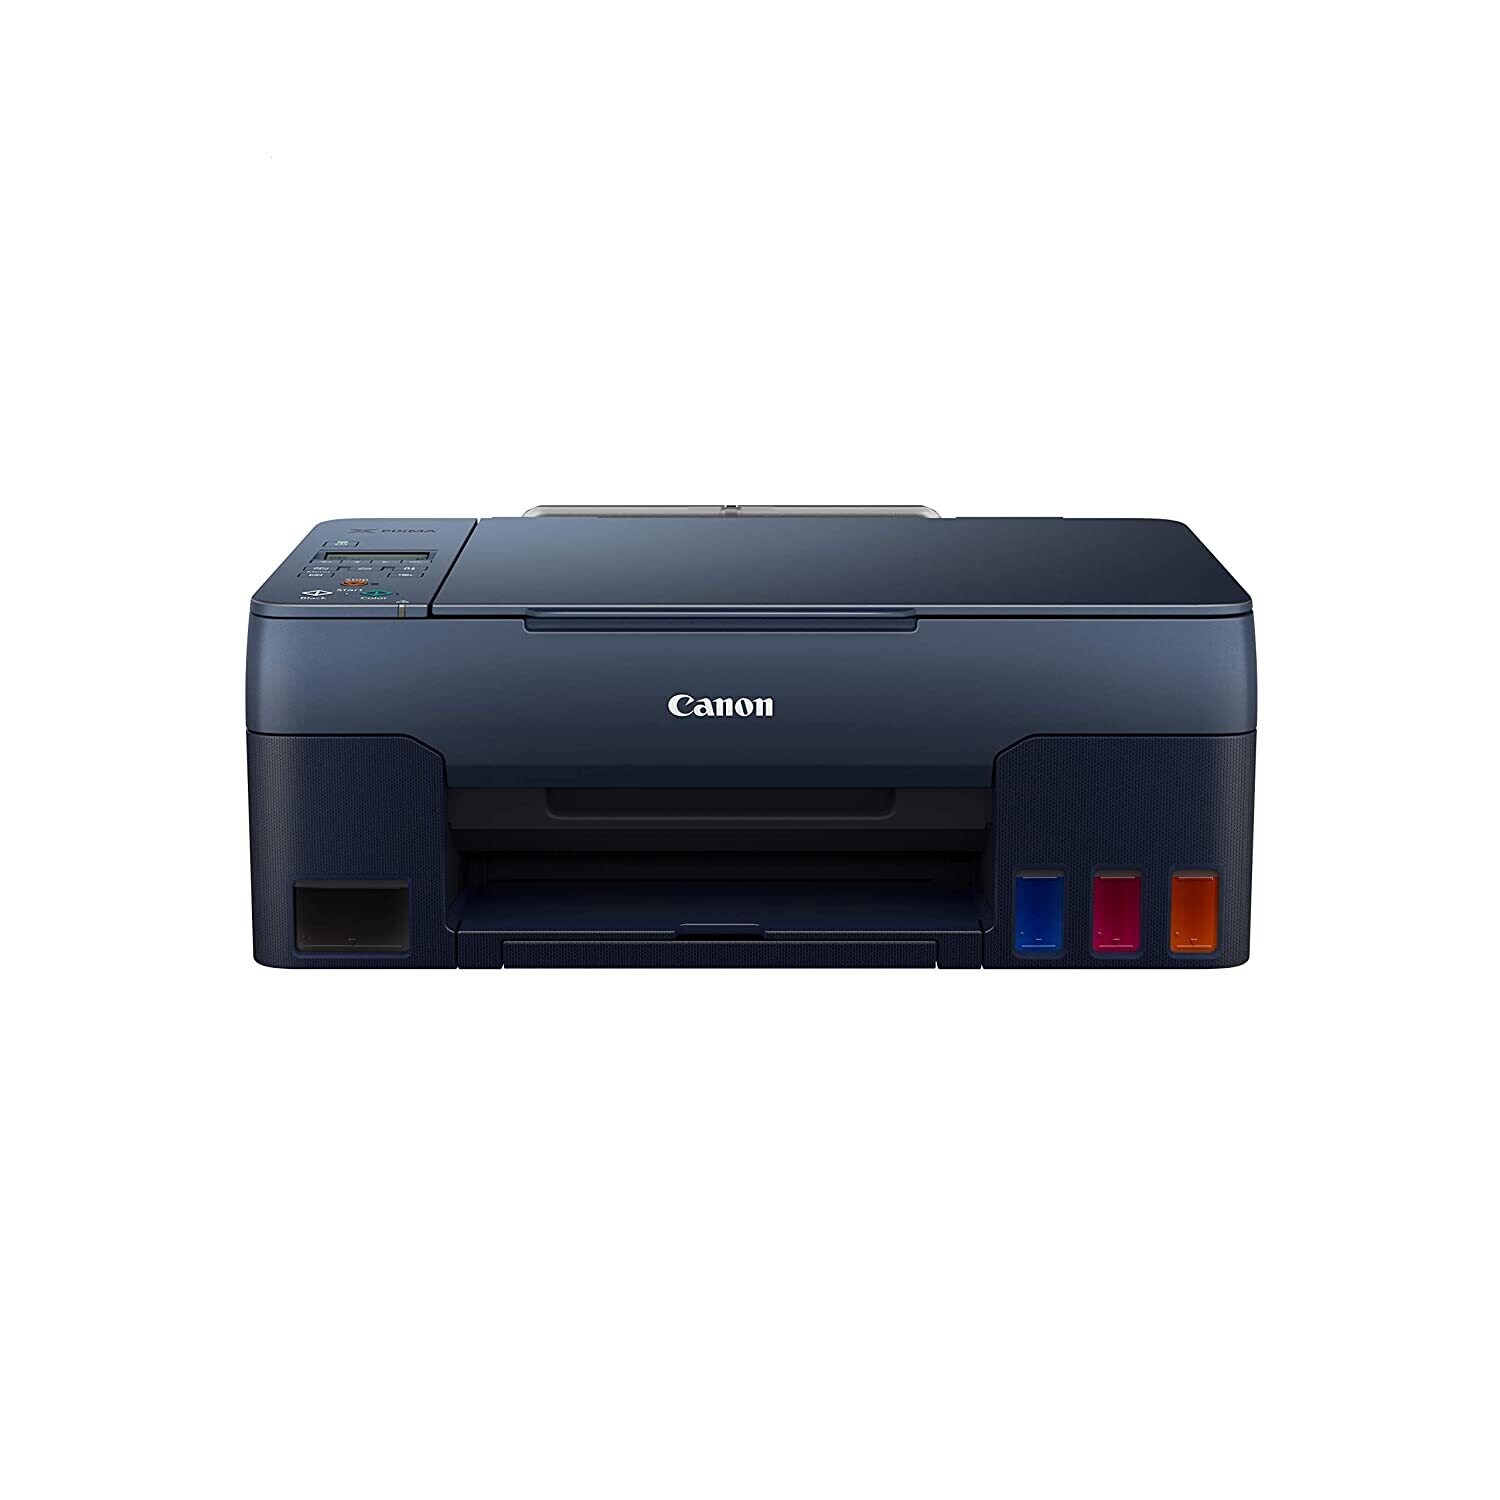 Canon G3020 All-in-One Wi-Fi Ink Tank Color Printer